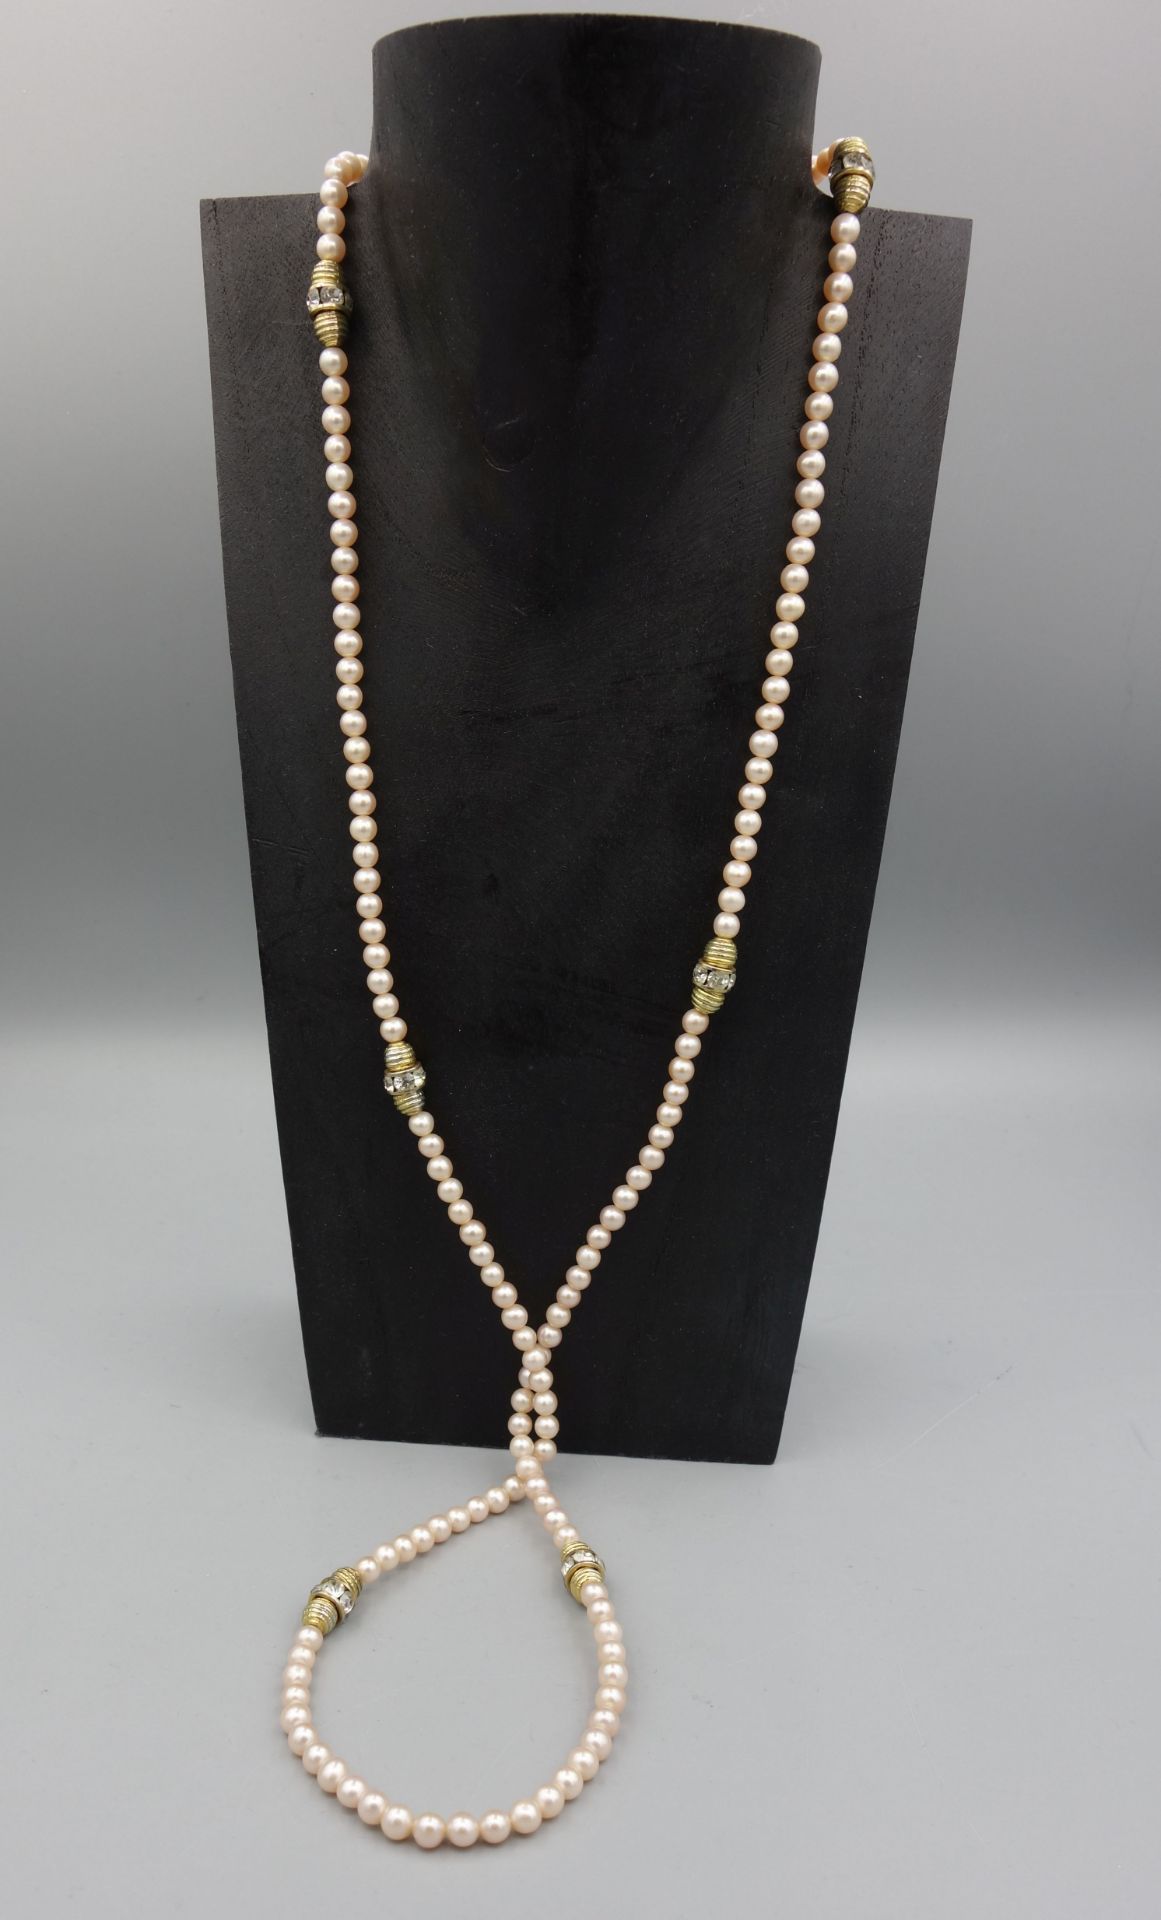 PEARL CHAIN - Image 3 of 3